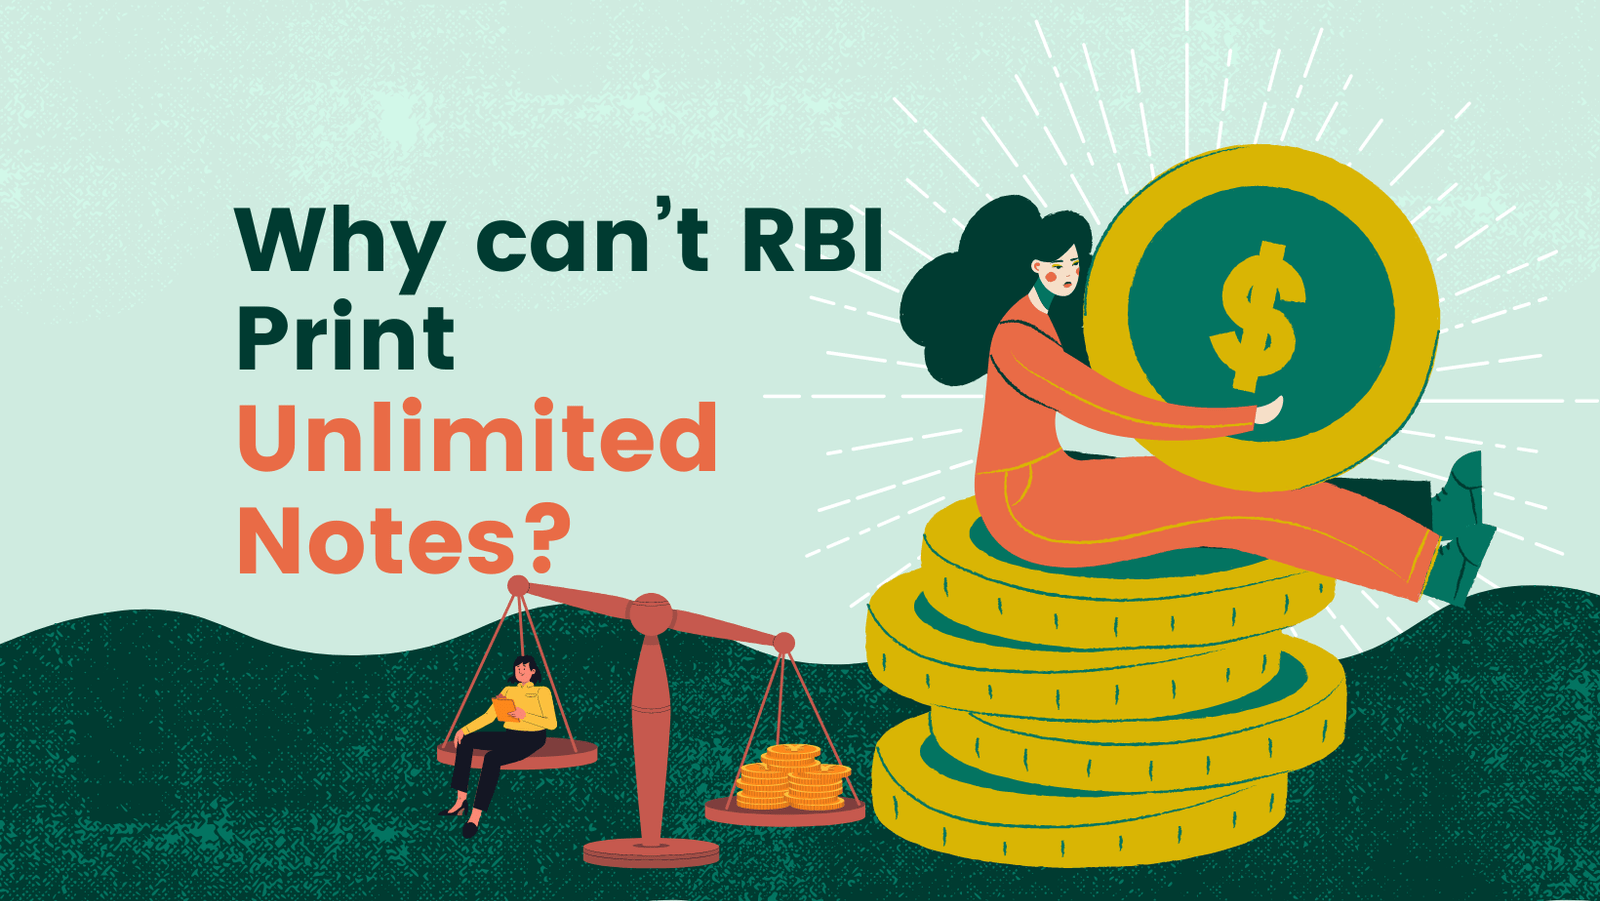 Why can’t RBI Print Unlimited Notes?